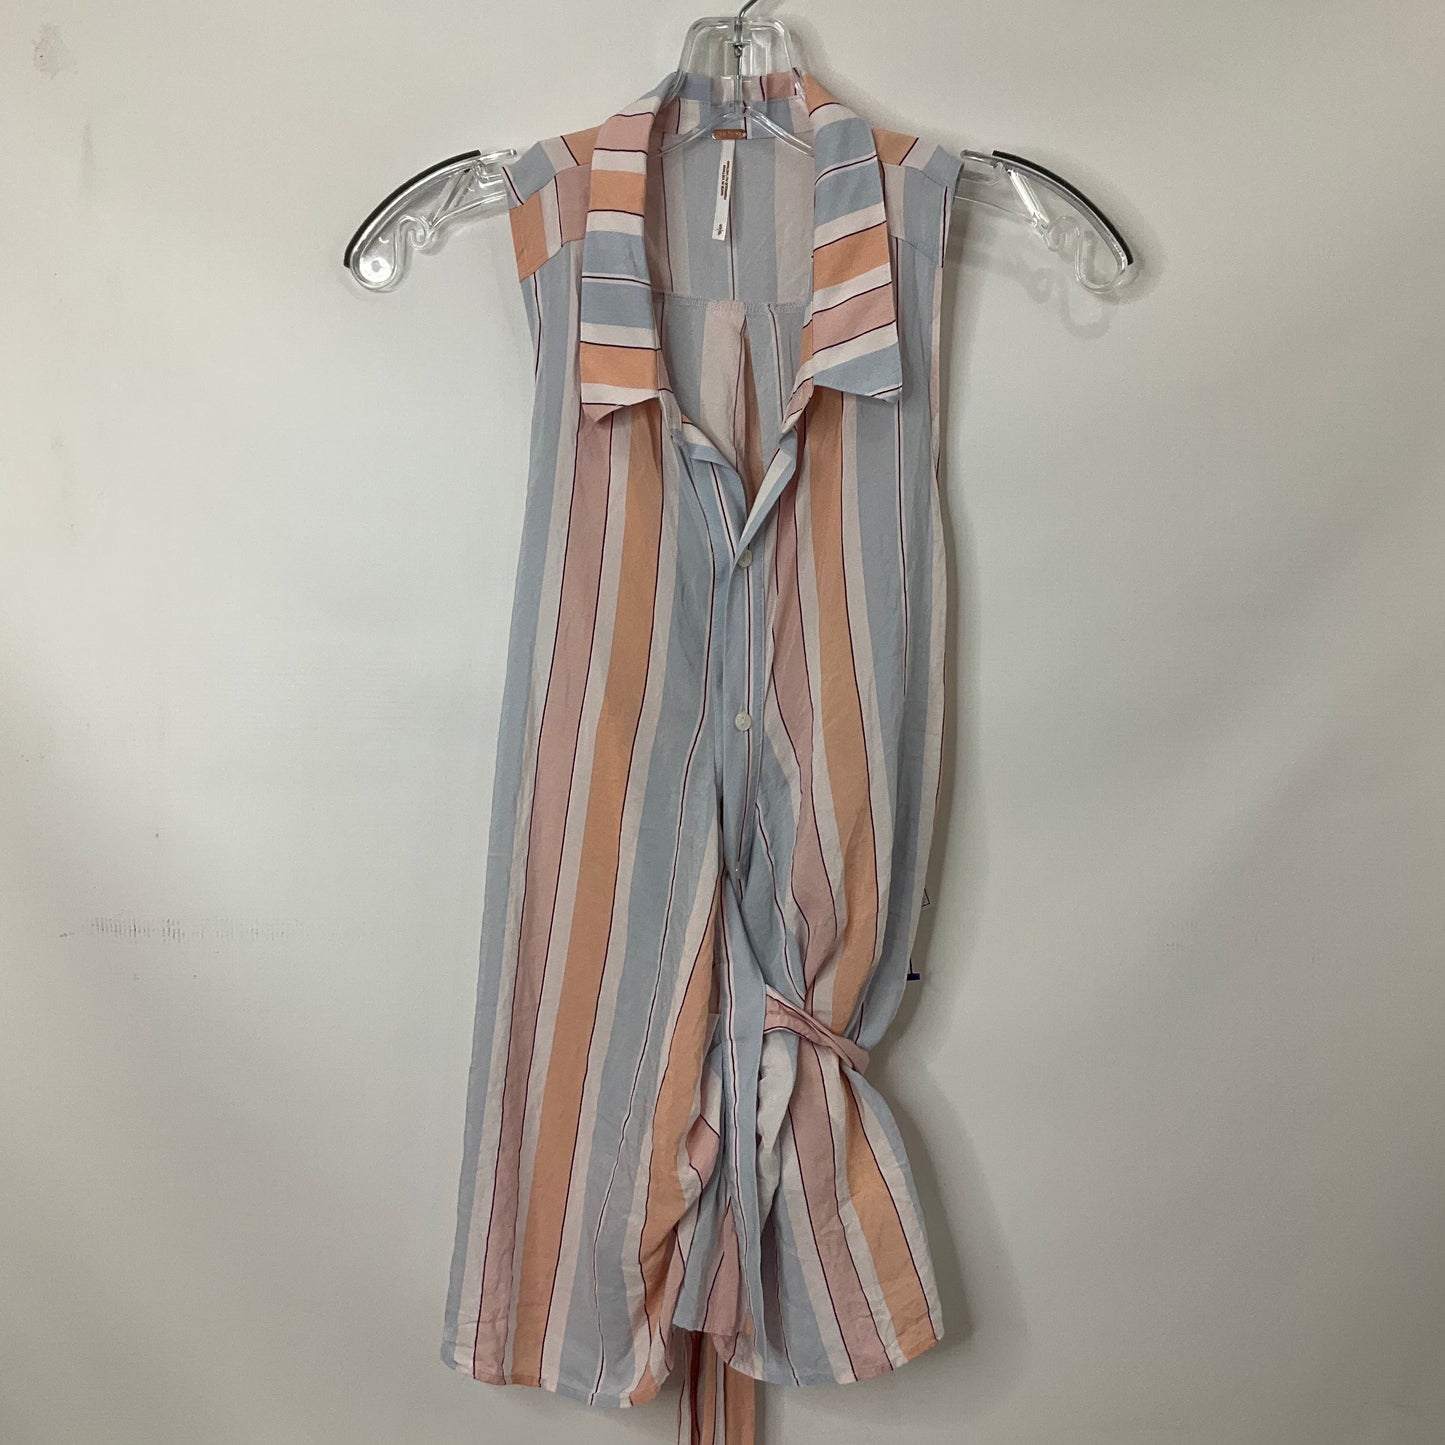 Striped Top Sleeveless Free People, Size S